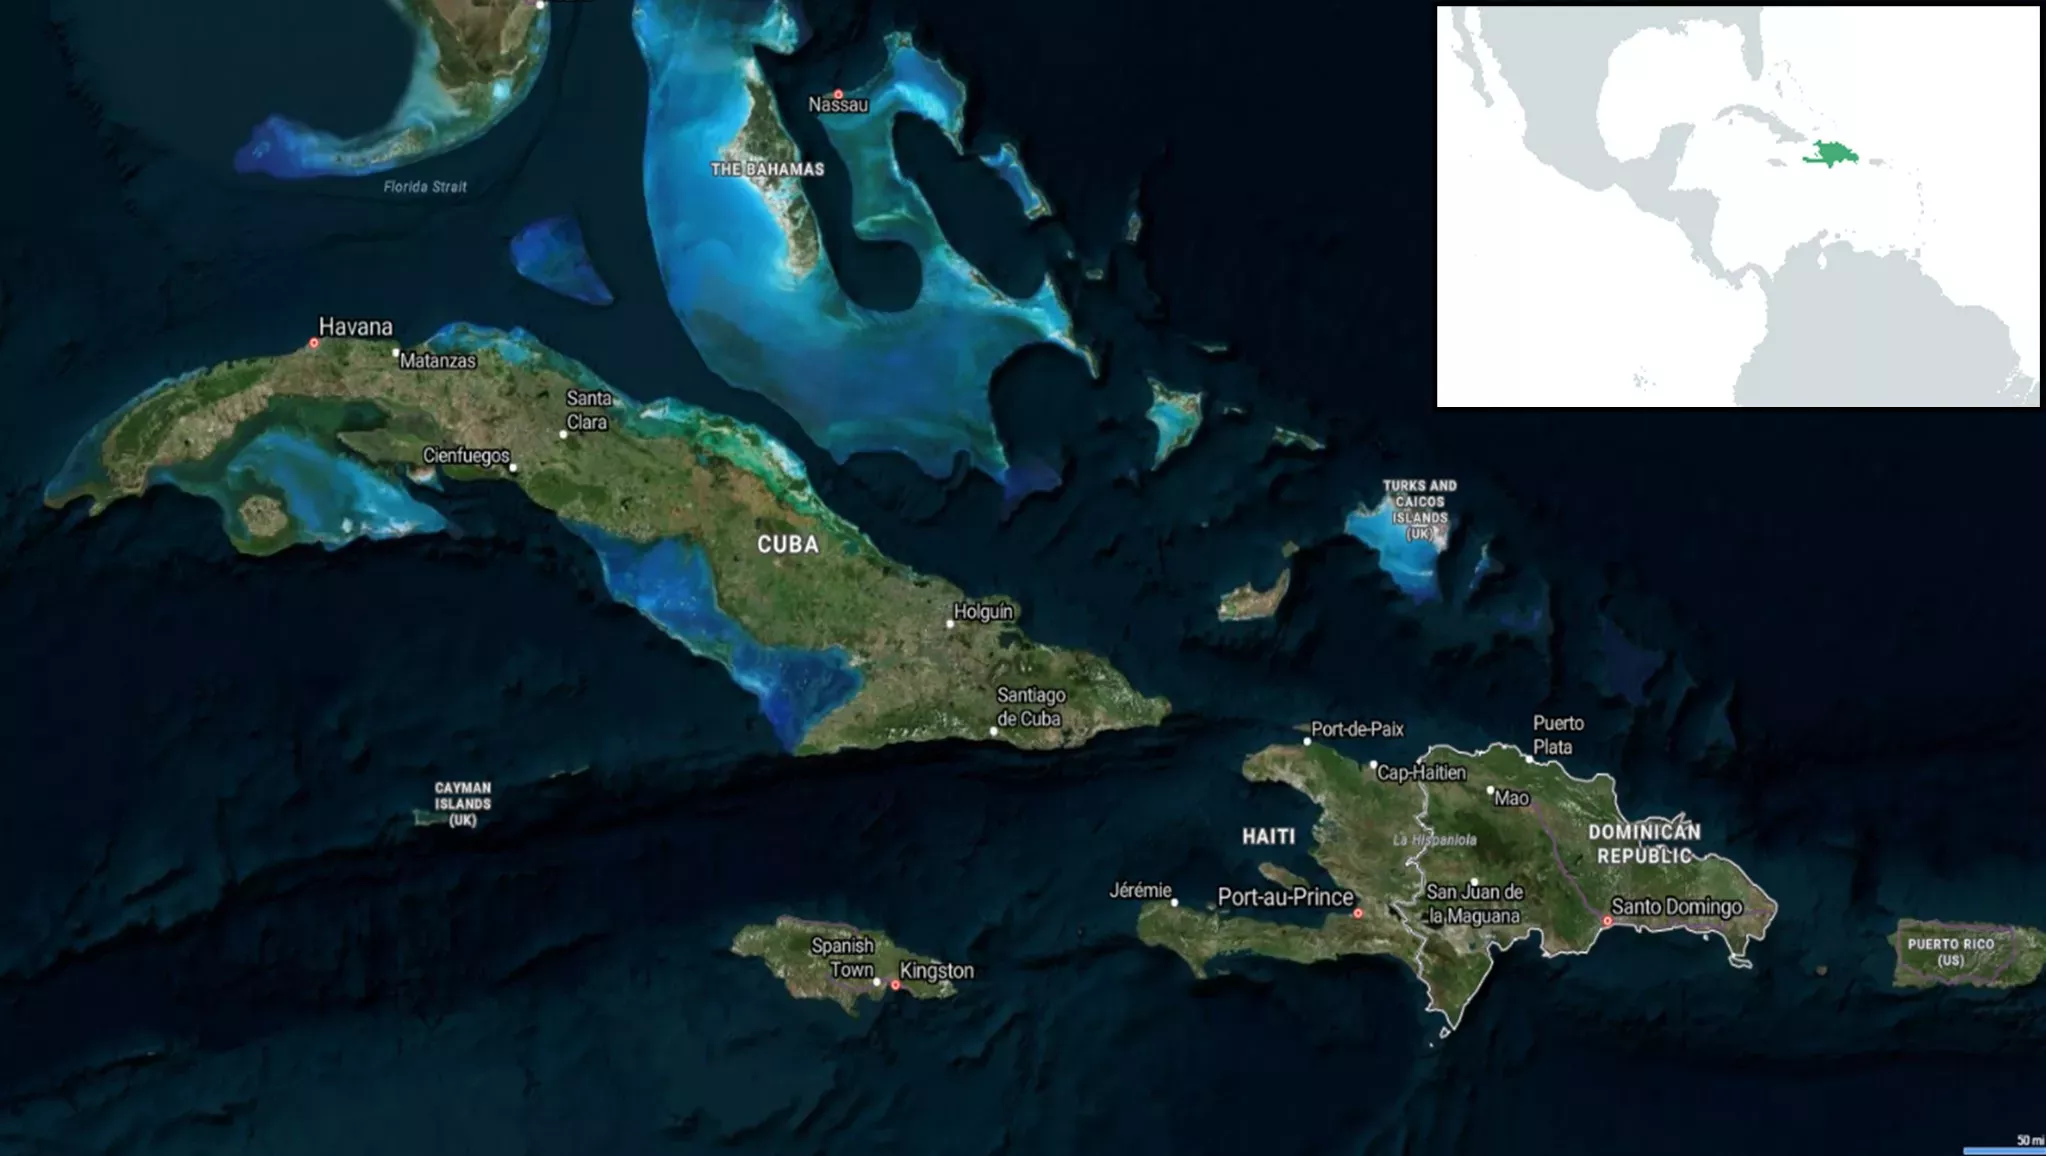 A map image shows the central location of the island of Hispaniola within the Caribbean isles.